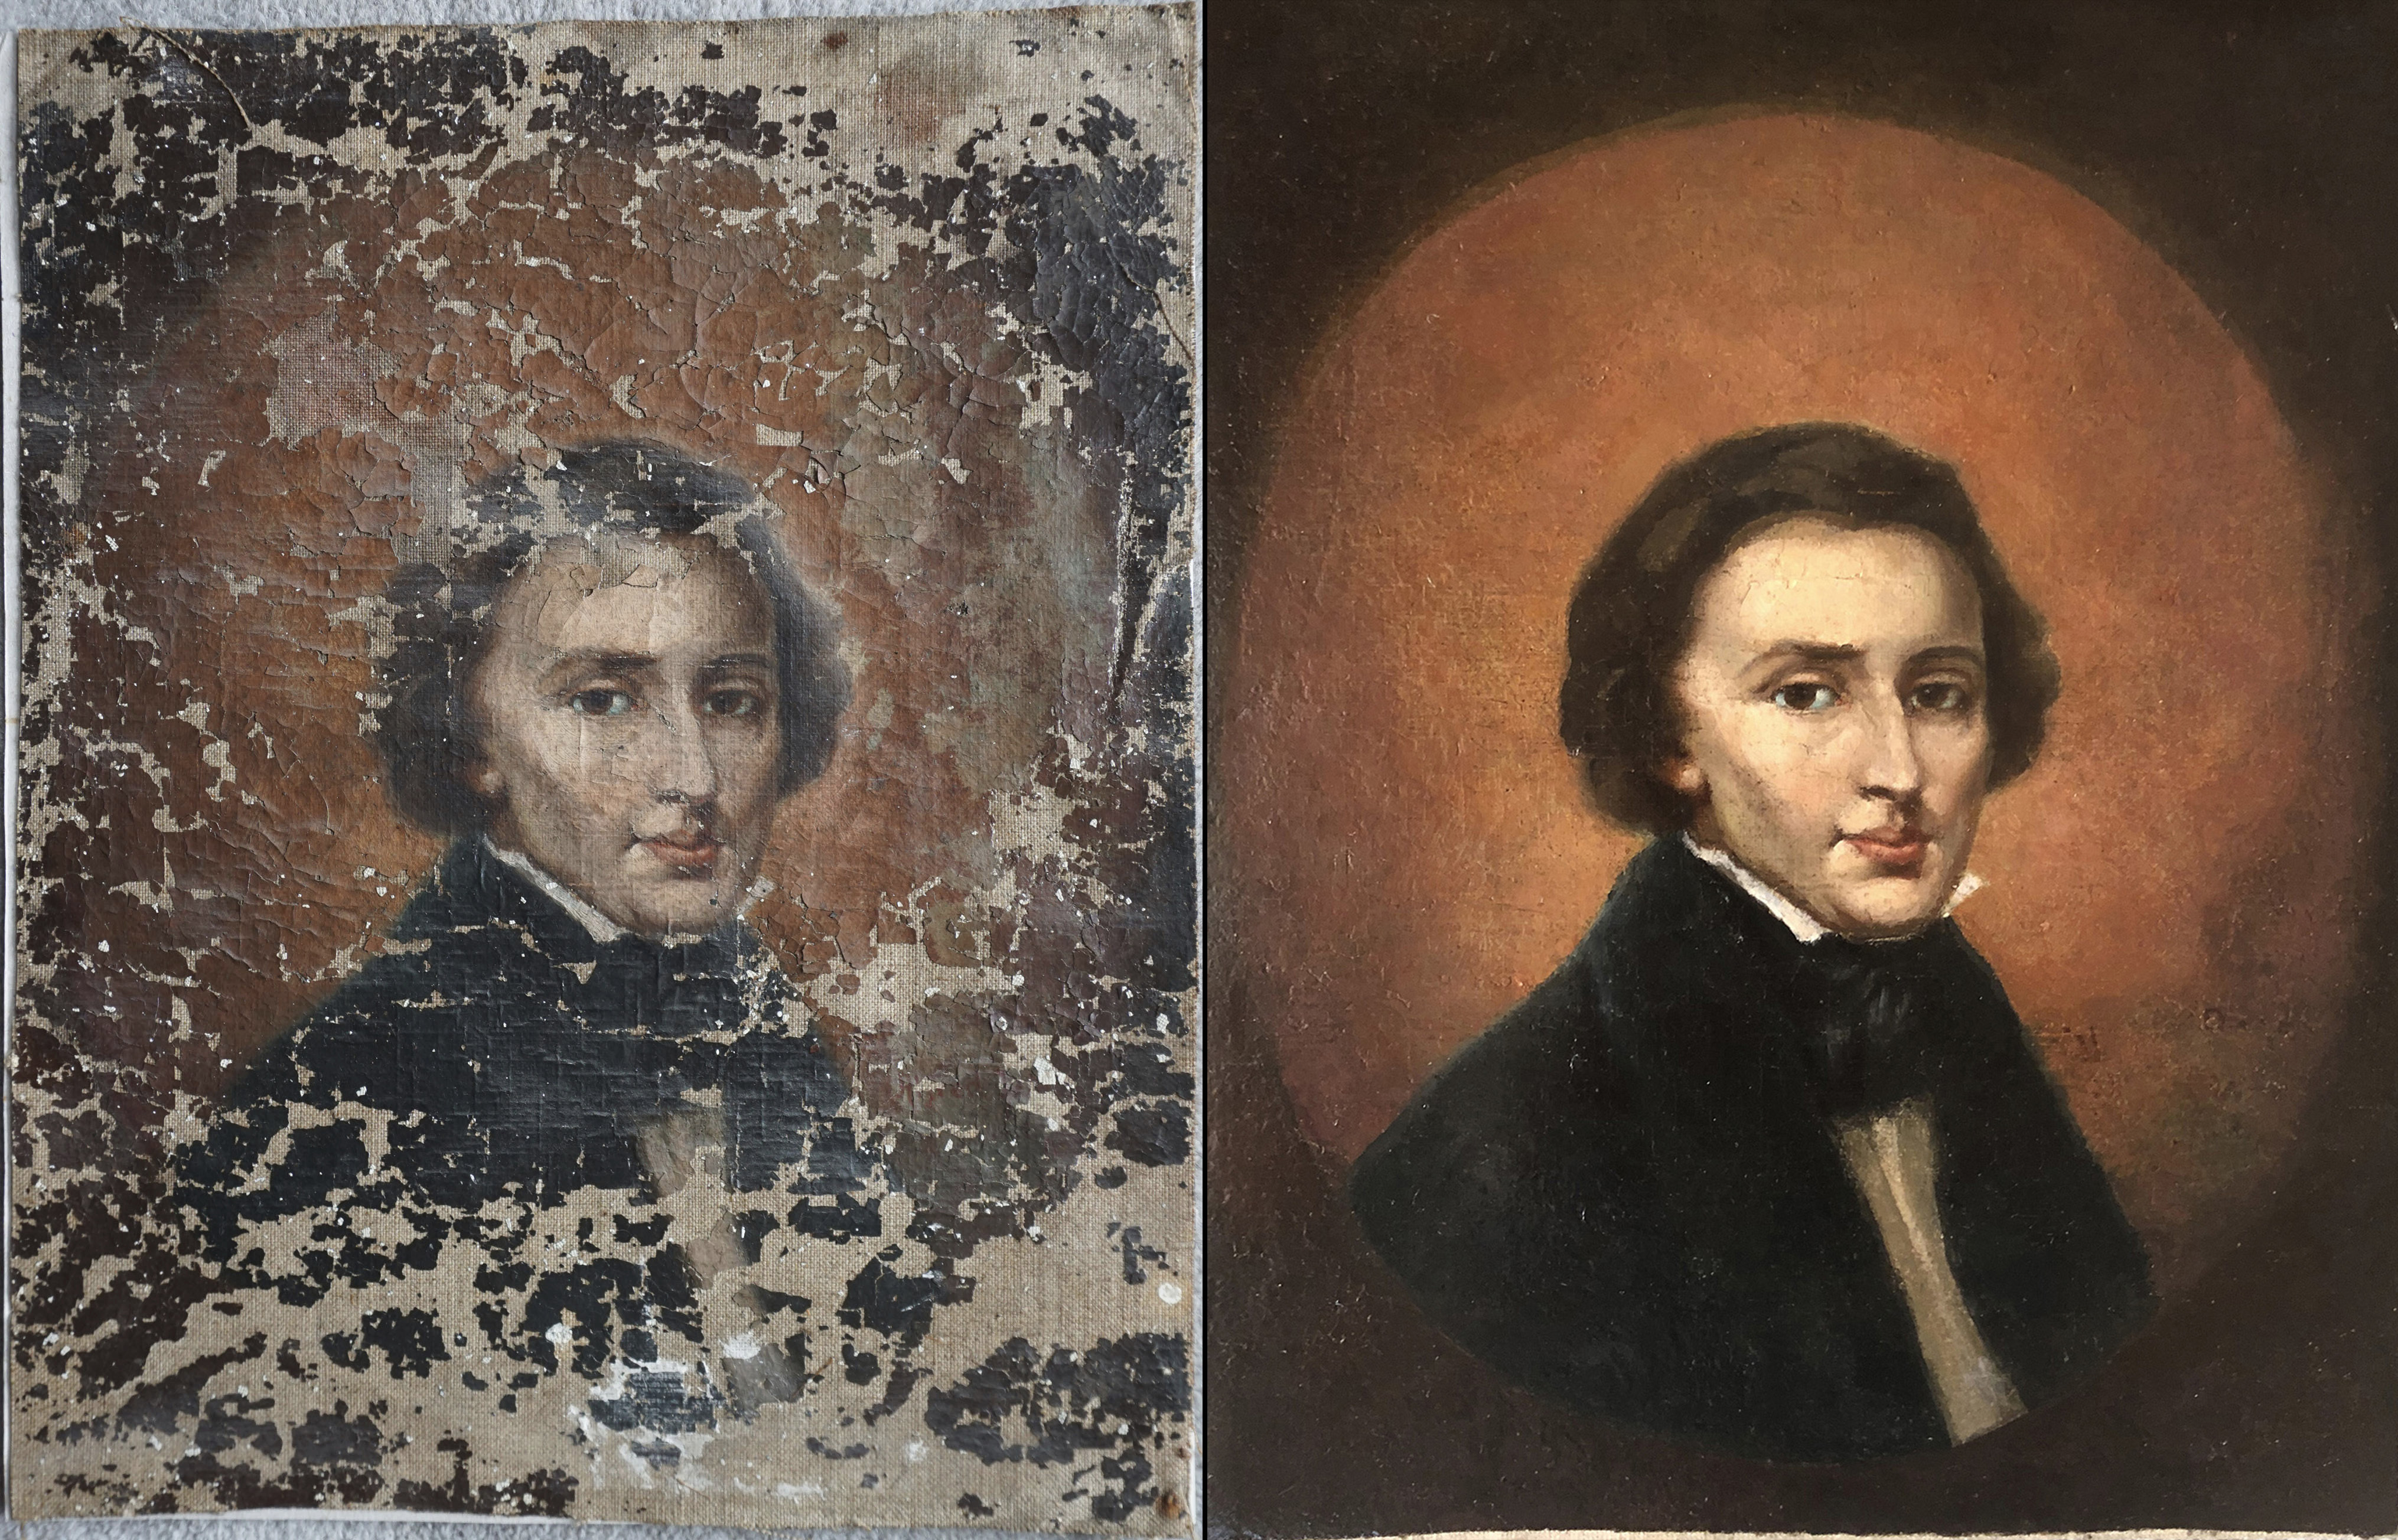 A before and after of the portrait pre- and post-renovation